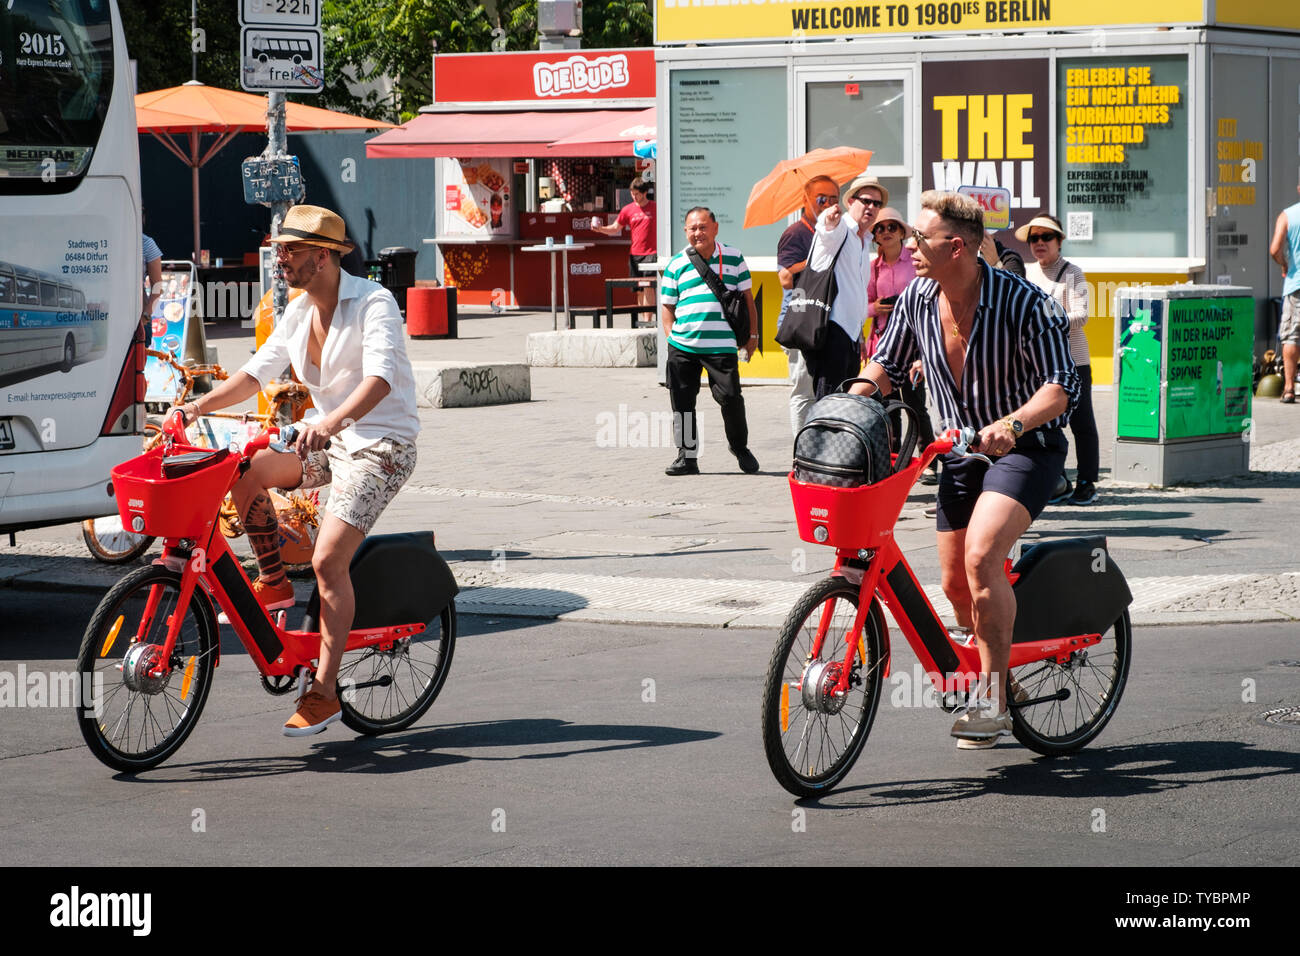 Berlin, Germany - June, 2019: Tourists riding electric bike sharing bicycles, JUMP by UBER on street in Berlin, Germany Stock Photo